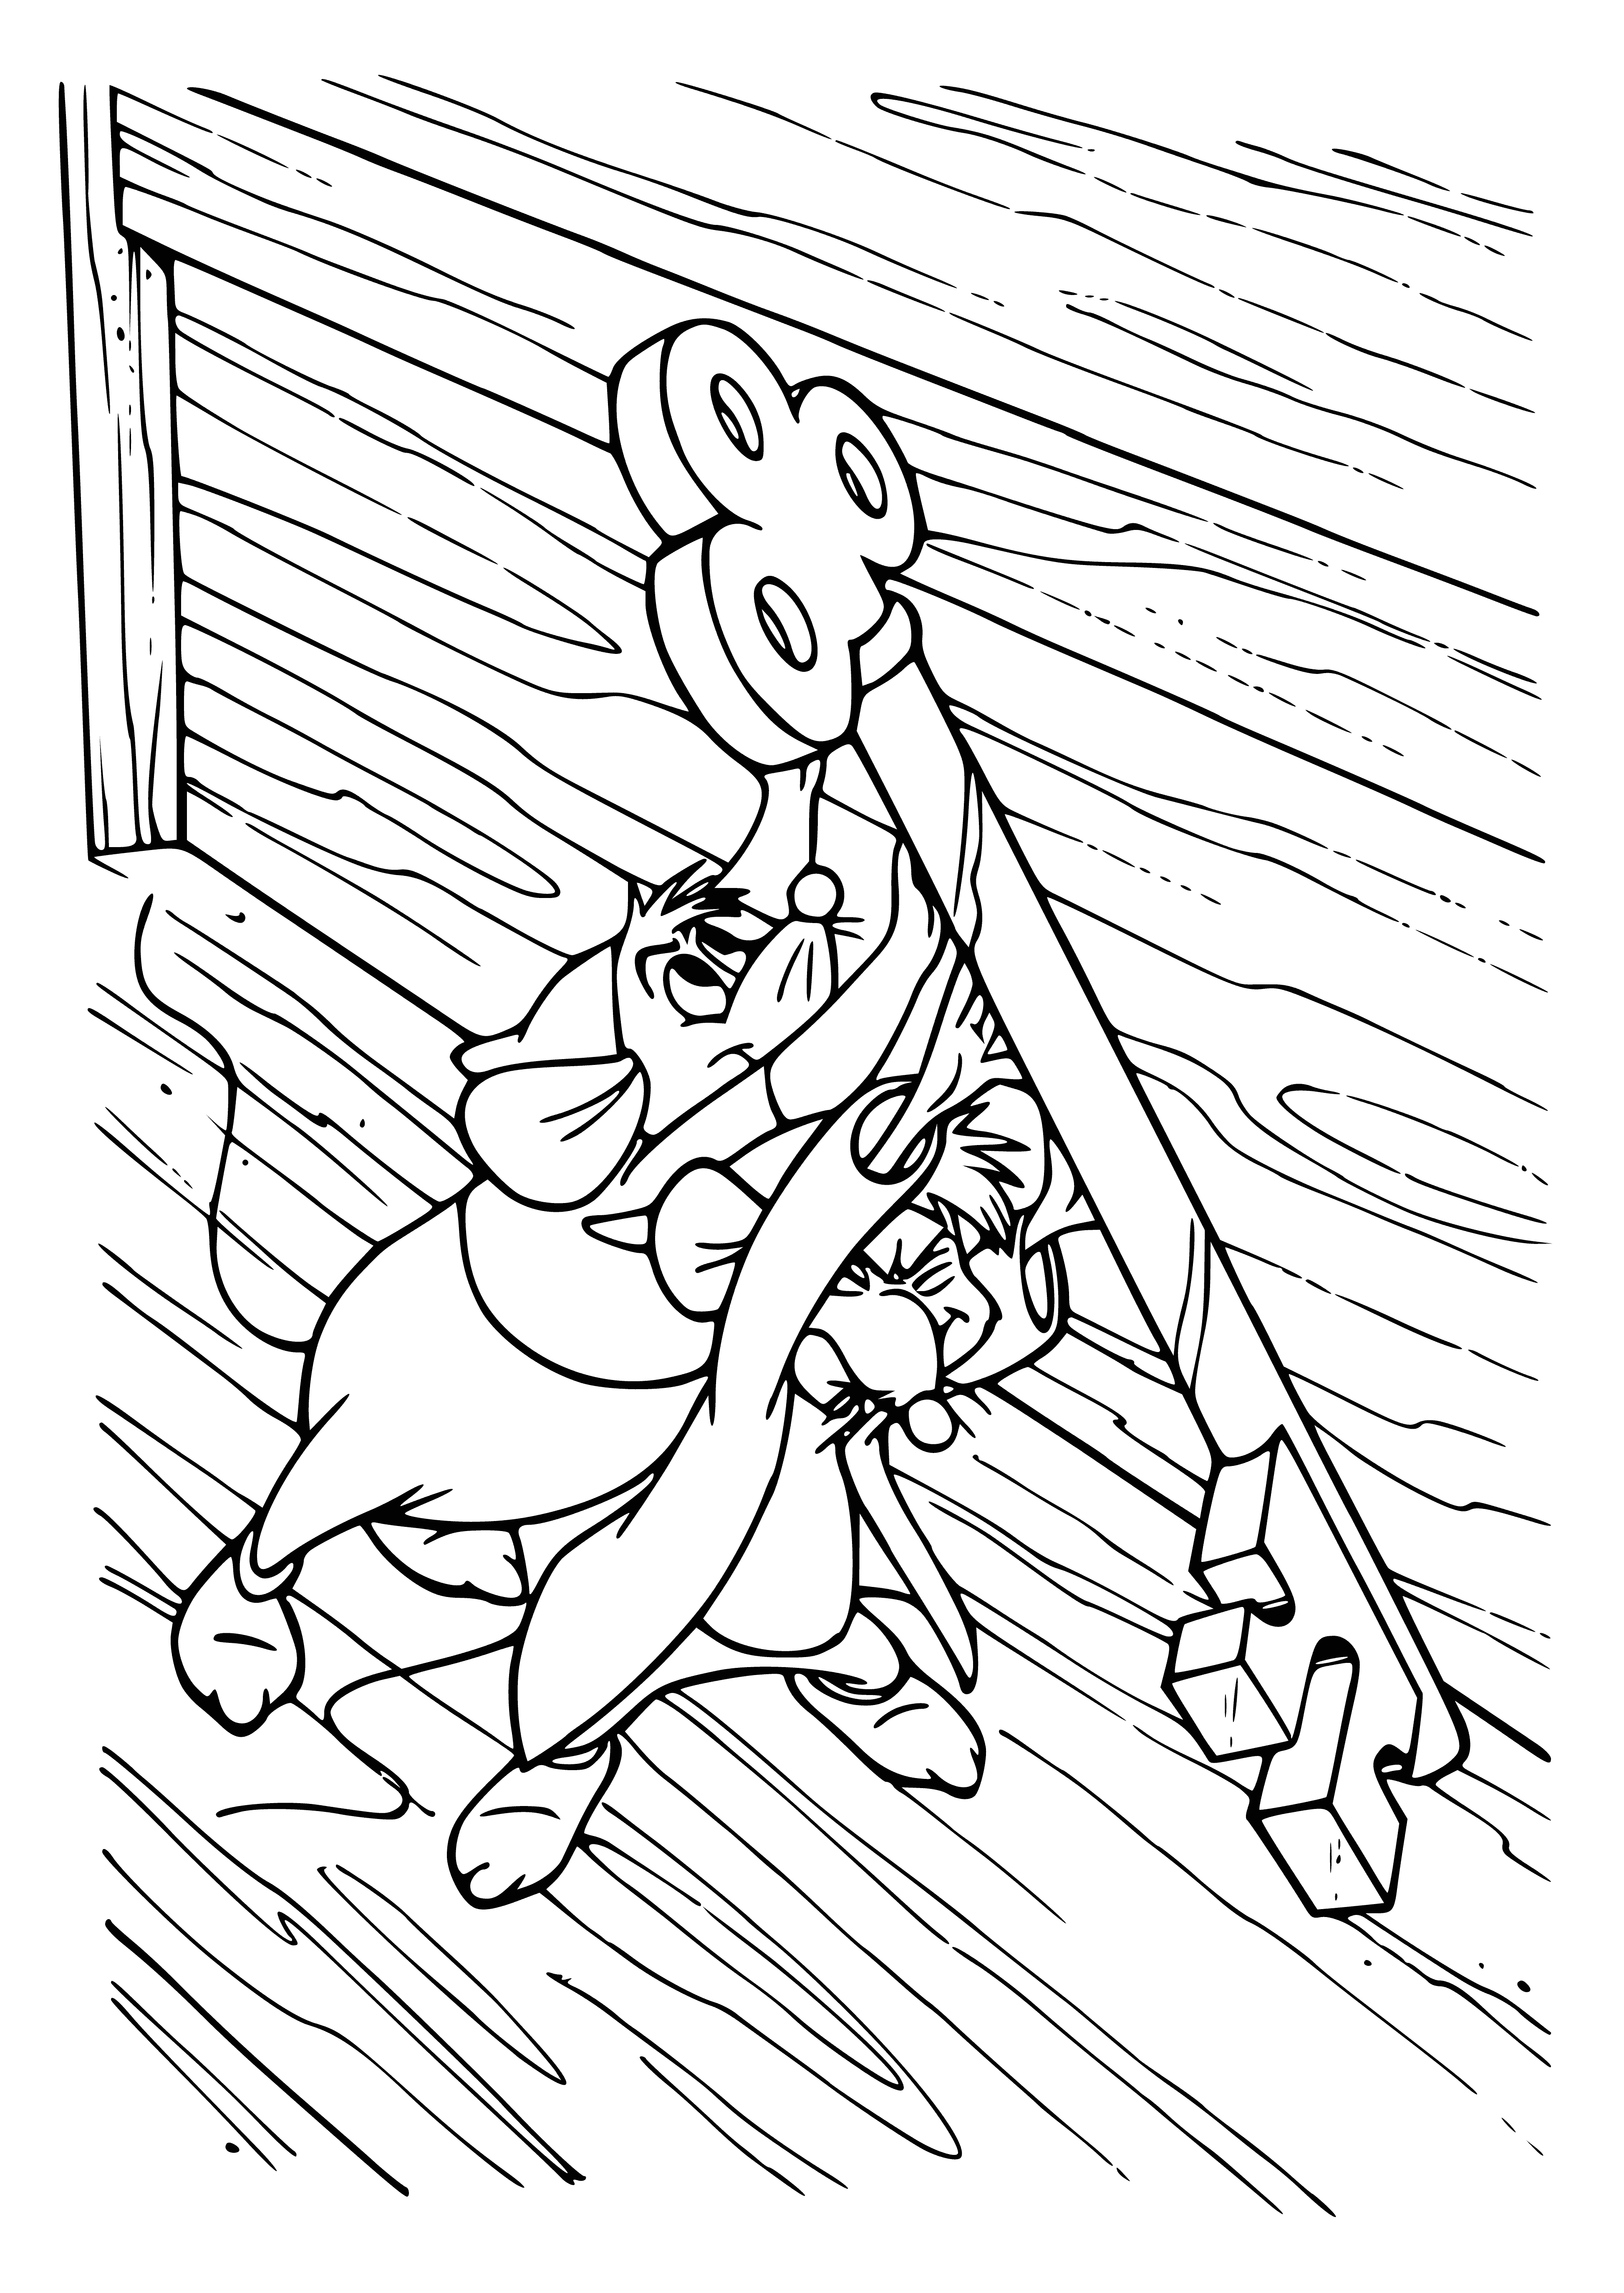 coloring page: She's heartbroken, but the fairy godmother helps her and the mice find a way to make the slipper fit.

Cinderella's heartbroken but the fairy godmother and mice help her get the slipper to fit. #fairytale